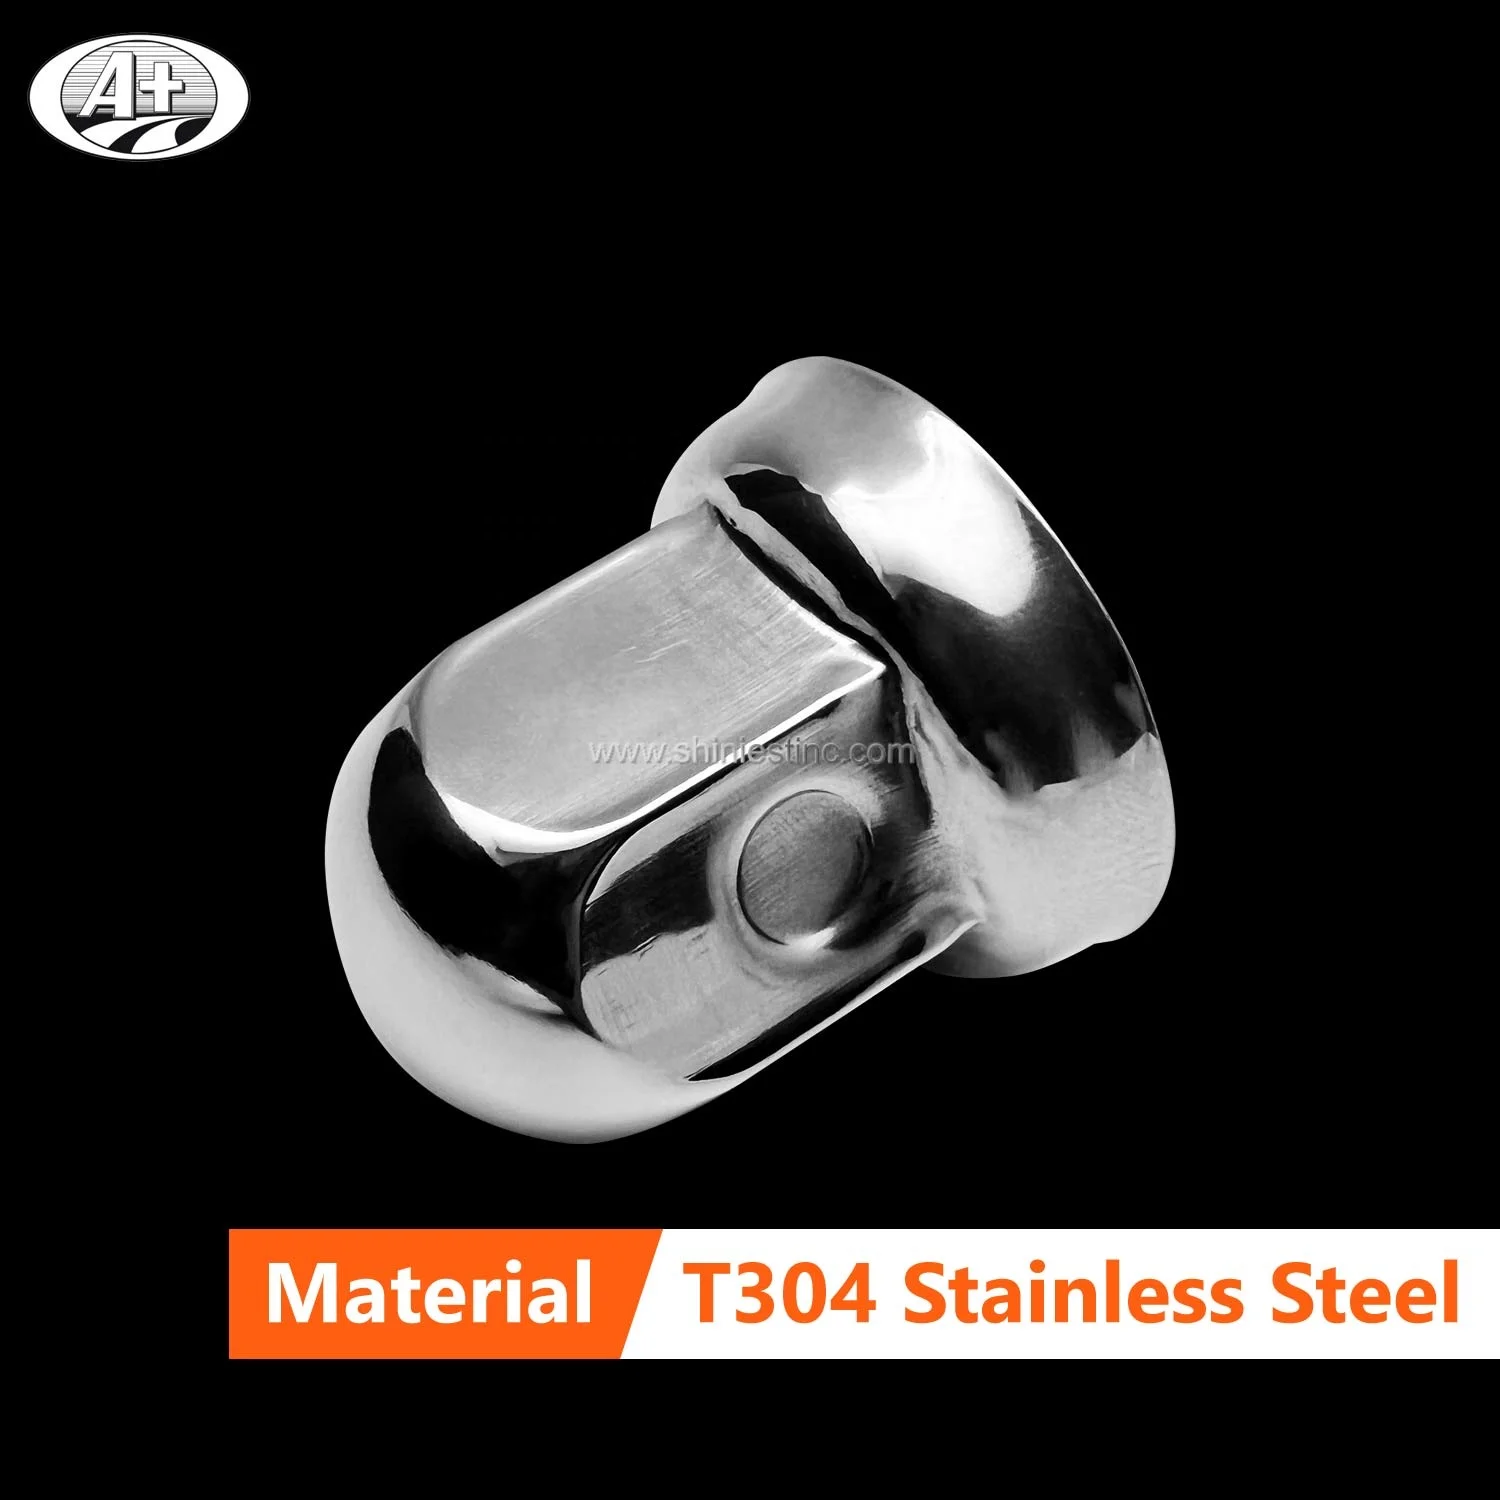 32MM Stainless steel truck nut covers for truck wheels